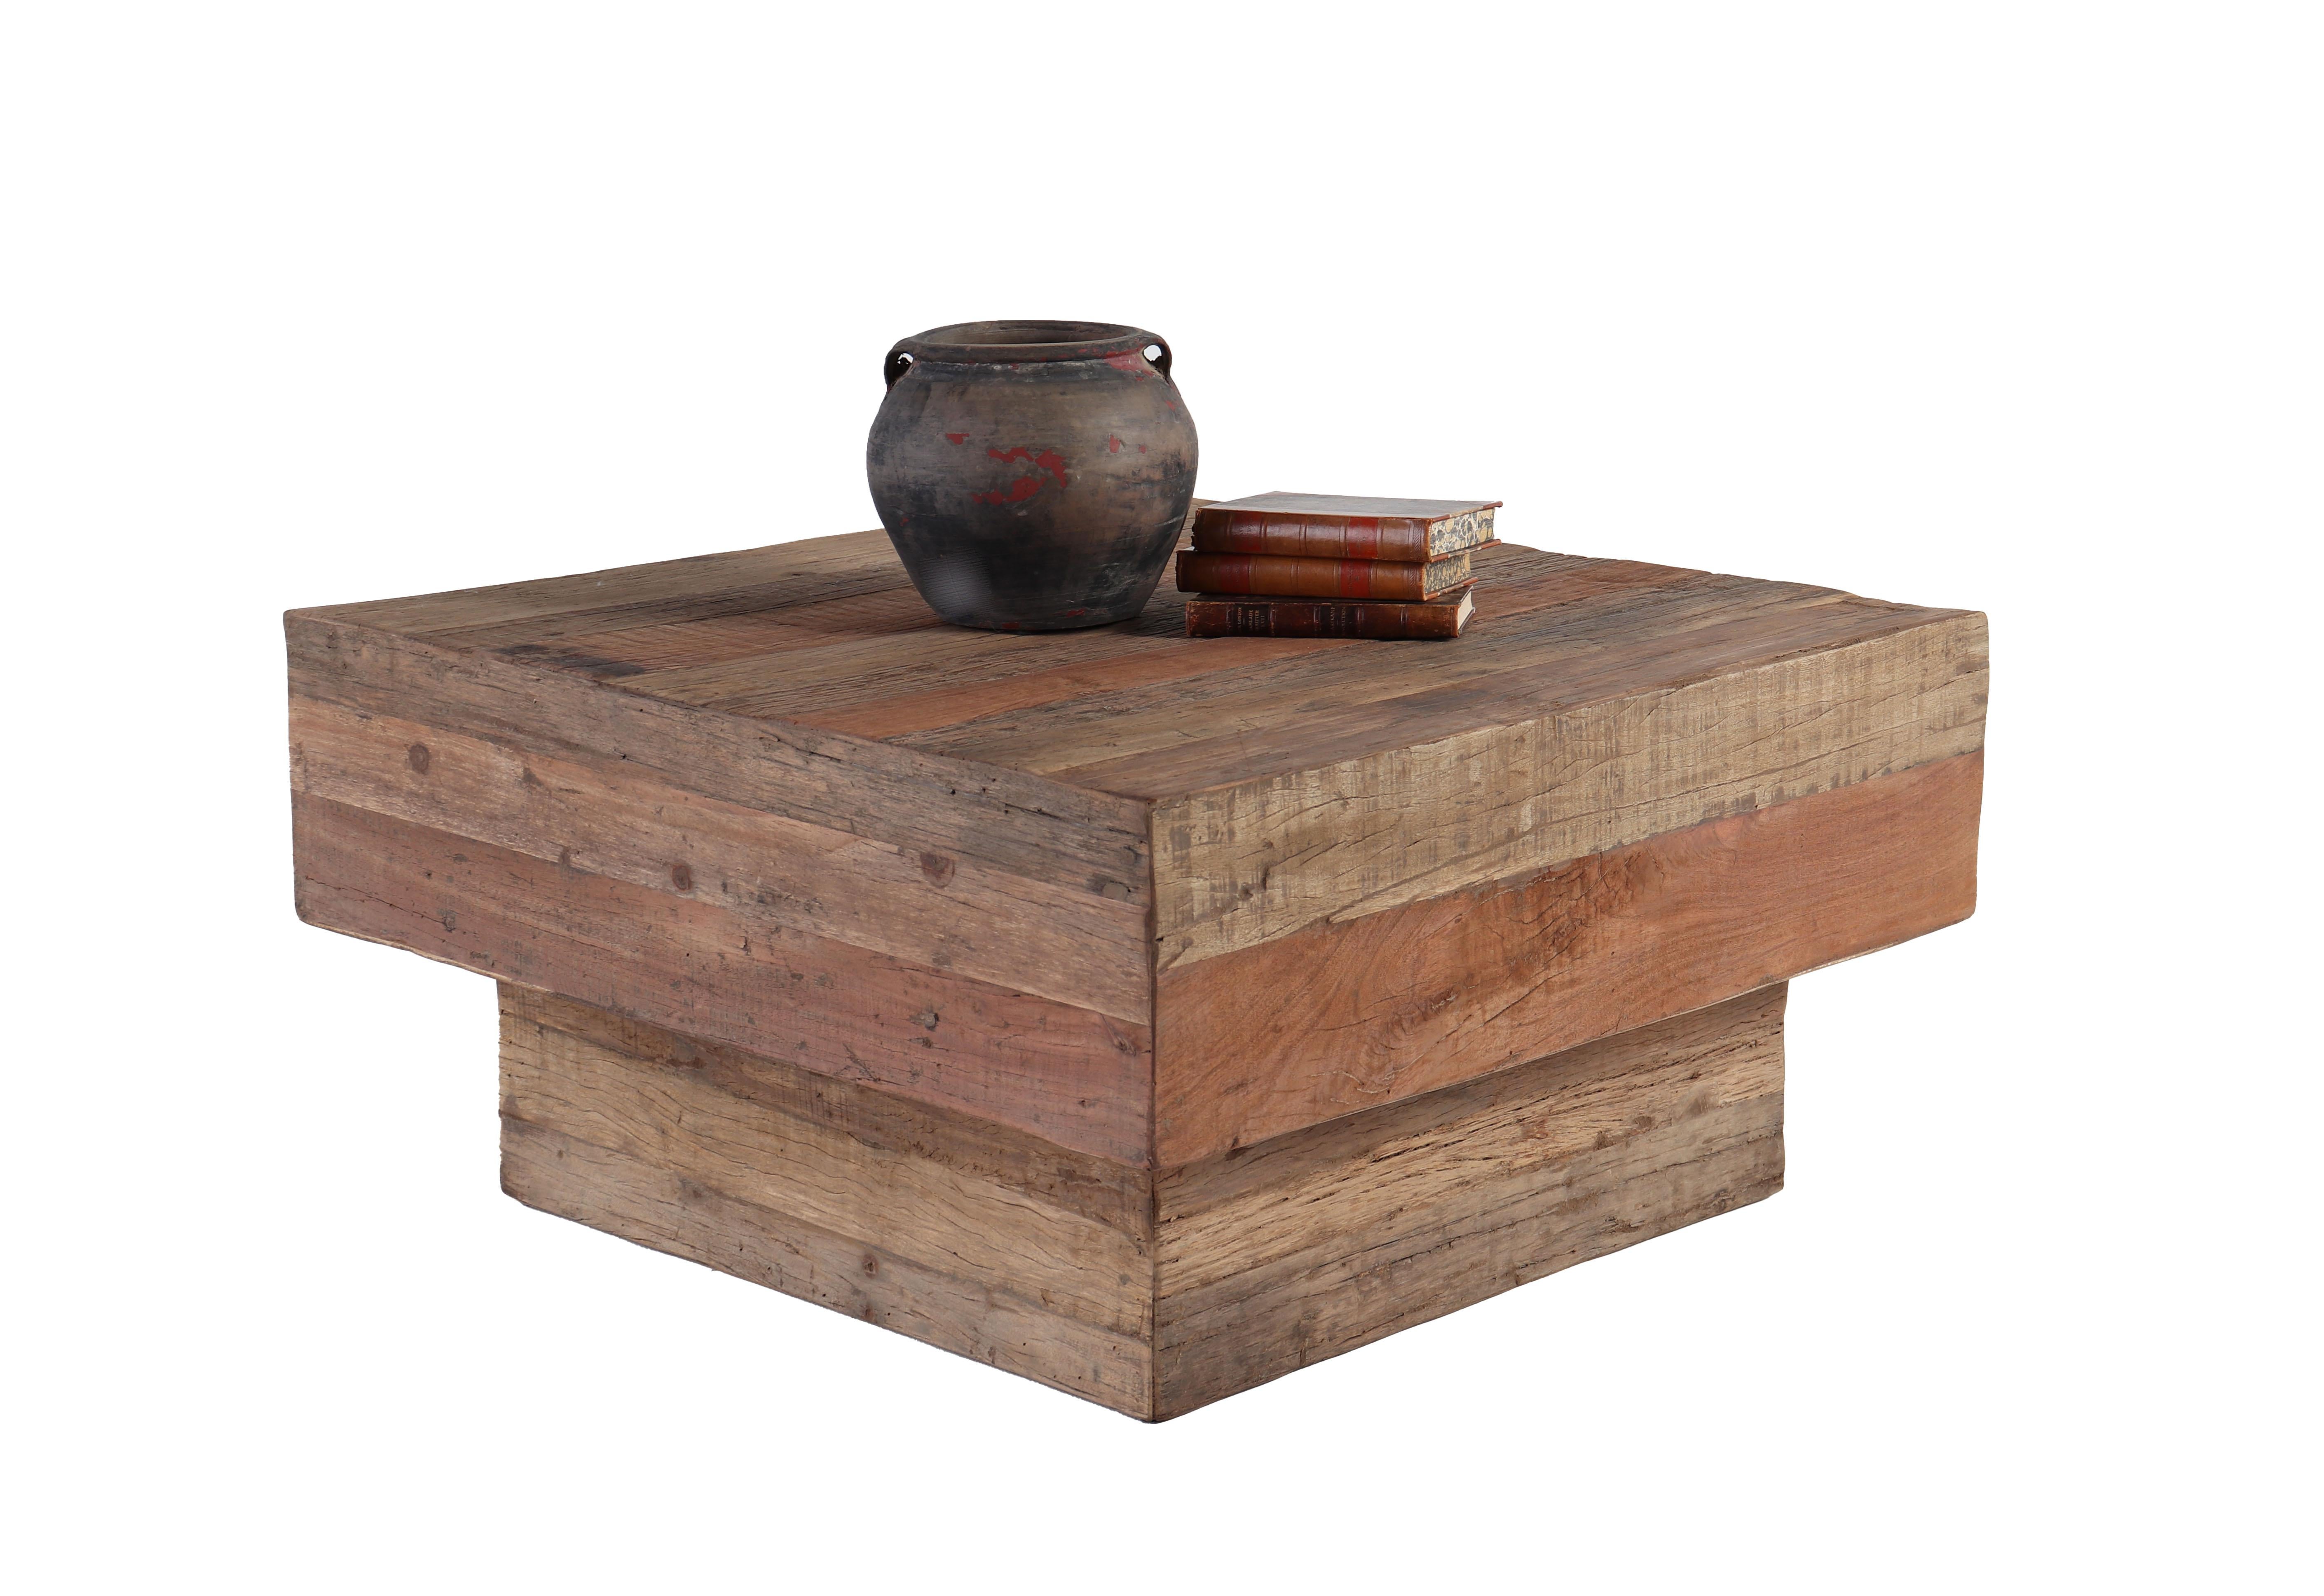 European Contemporary Coffee Table Made from Repurposed Teak Planking